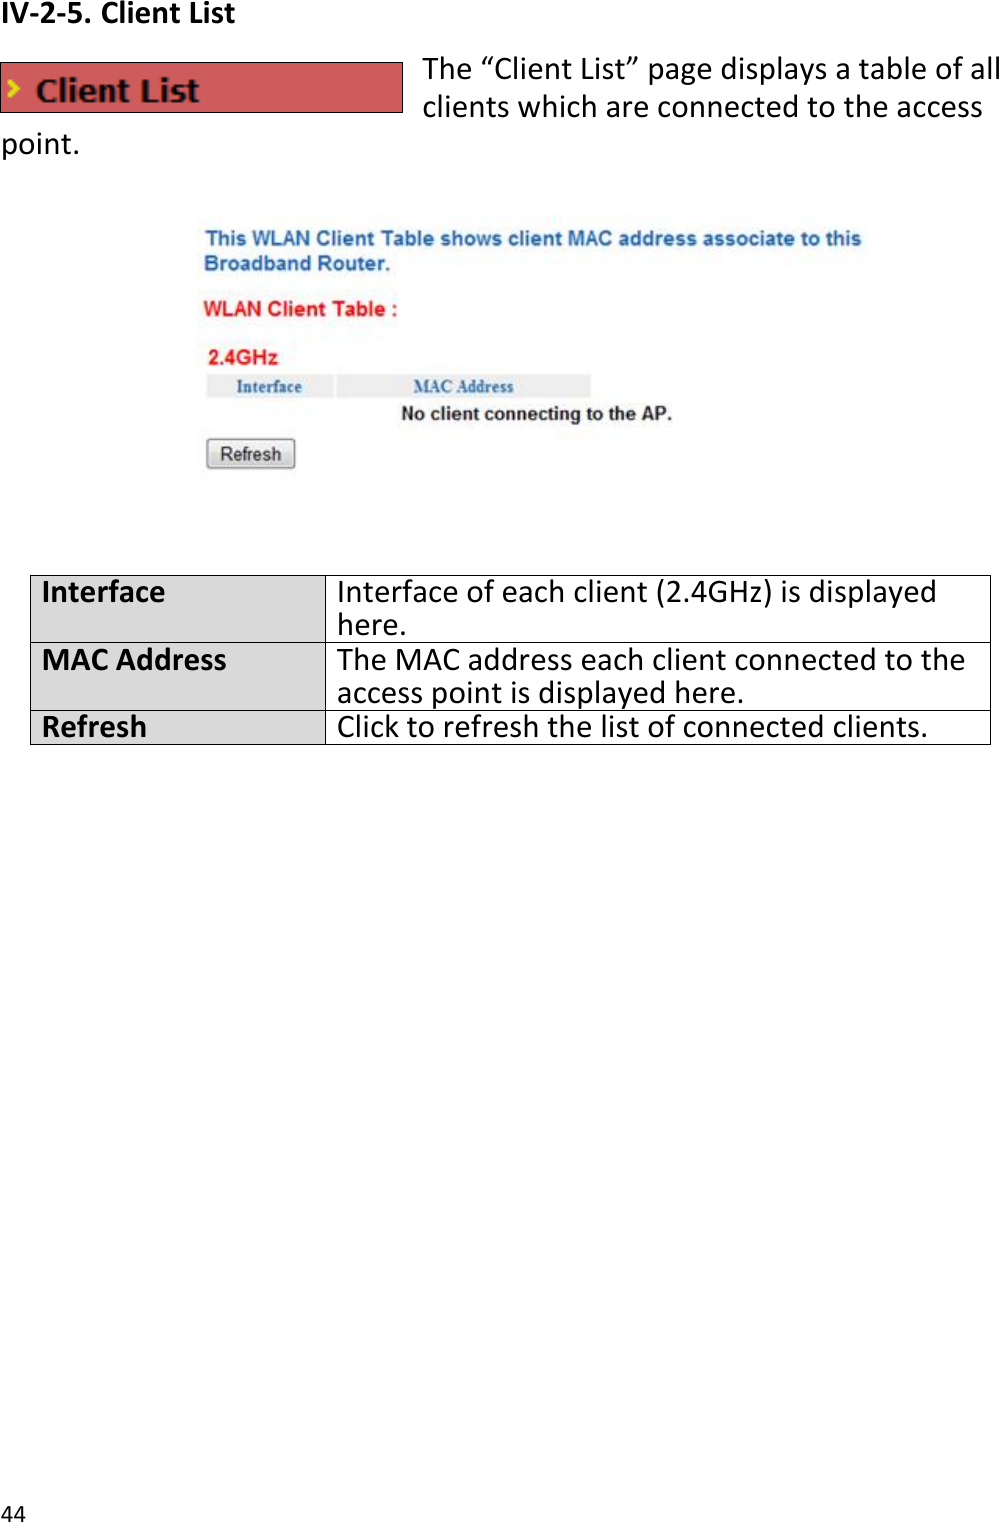 44  IV-2-5. Client List The “Client List” page displays a table of all clients which are connected to the access point.    Interface Interface of each client (2.4GHz) is displayed here. MAC Address The MAC address each client connected to the access point is displayed here. Refresh Click to refresh the list of connected clients.  